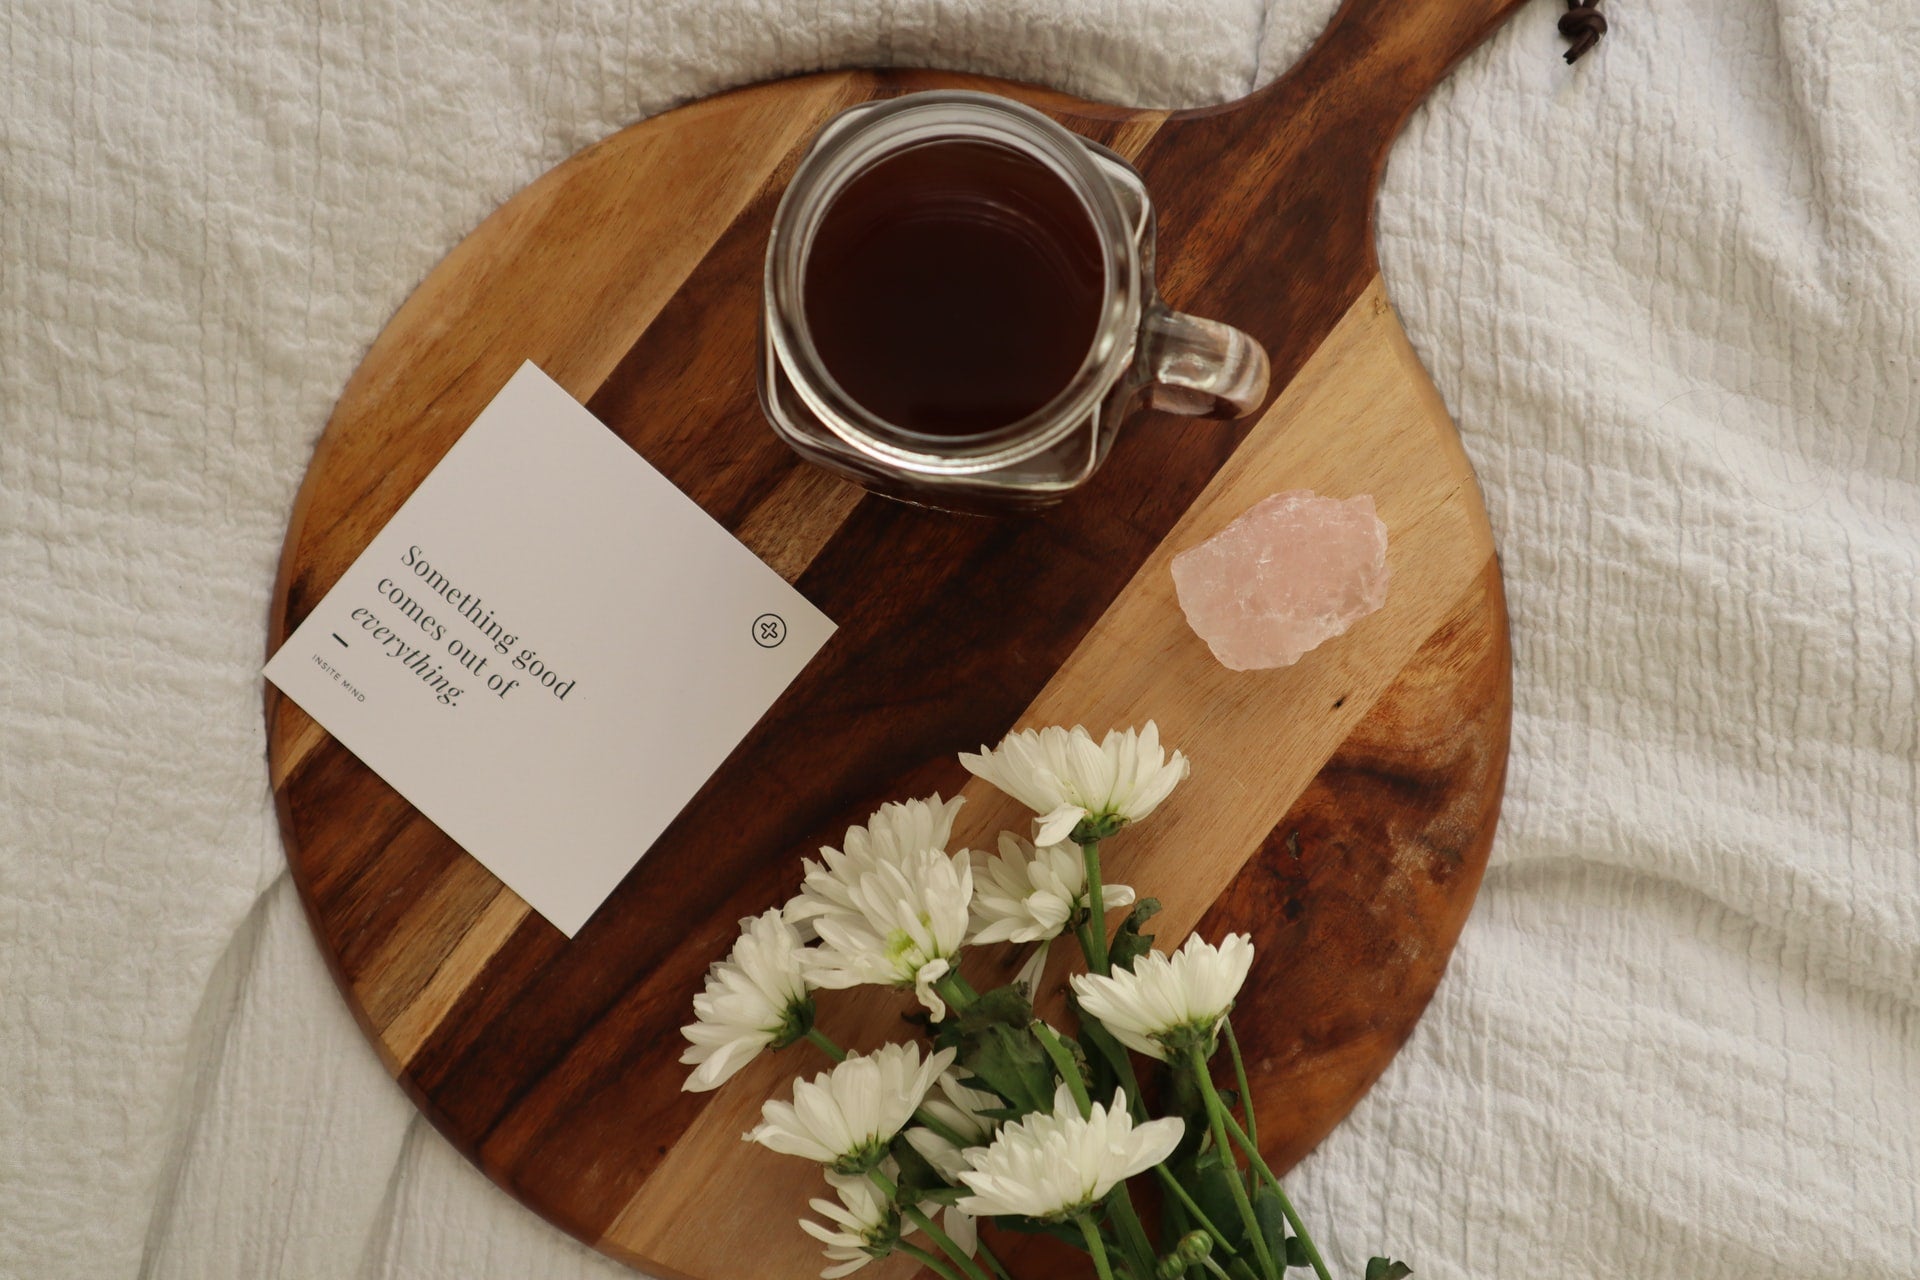 A positive affirmation card sitting beside a cup of tea and flowers.